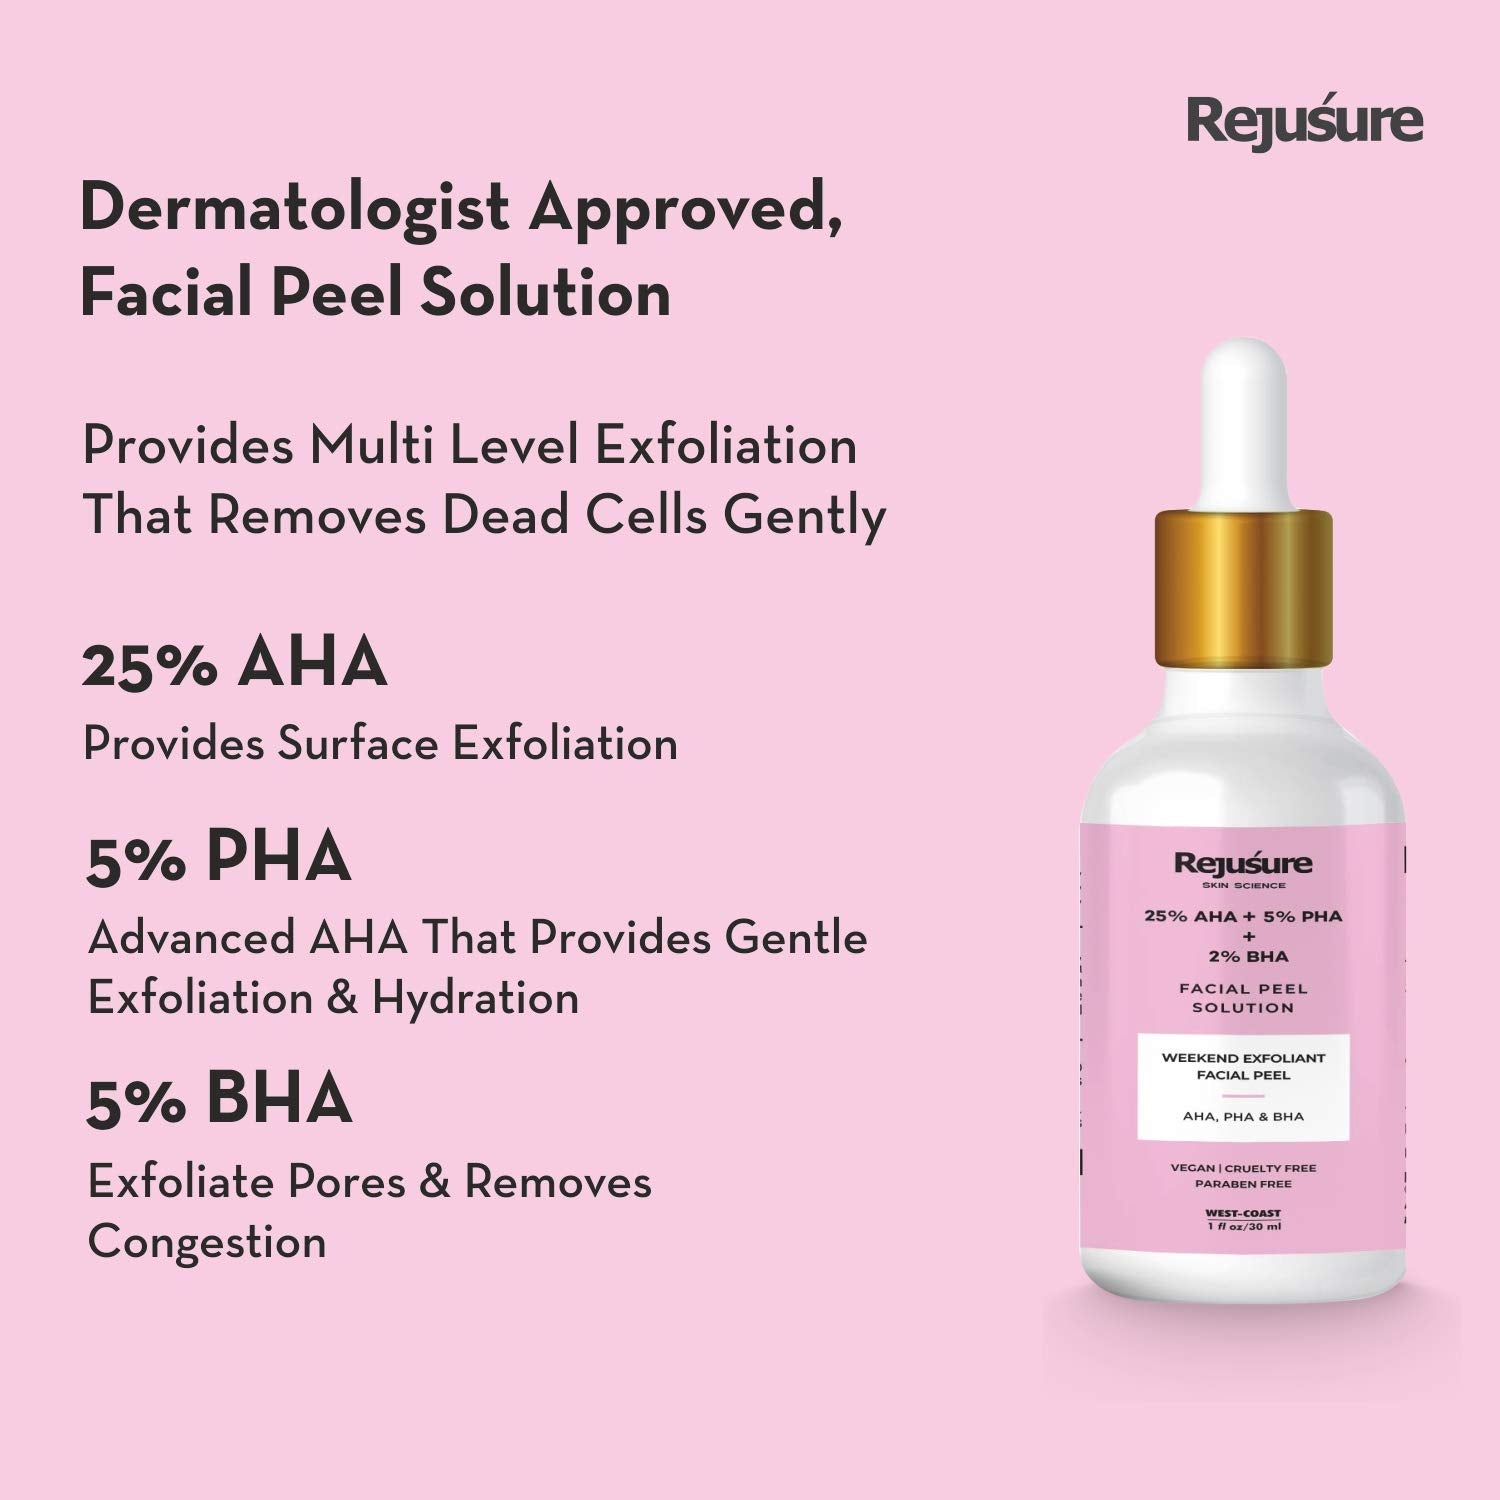 Rejusure AHA 25% + PHA 5% + BHA 2% Facial Peeling Solution for Glowing Skin, Smooth Texture & Pore Cleansing | Weekend Facial Exfoliant or Peel 30ml (Pack of 5)